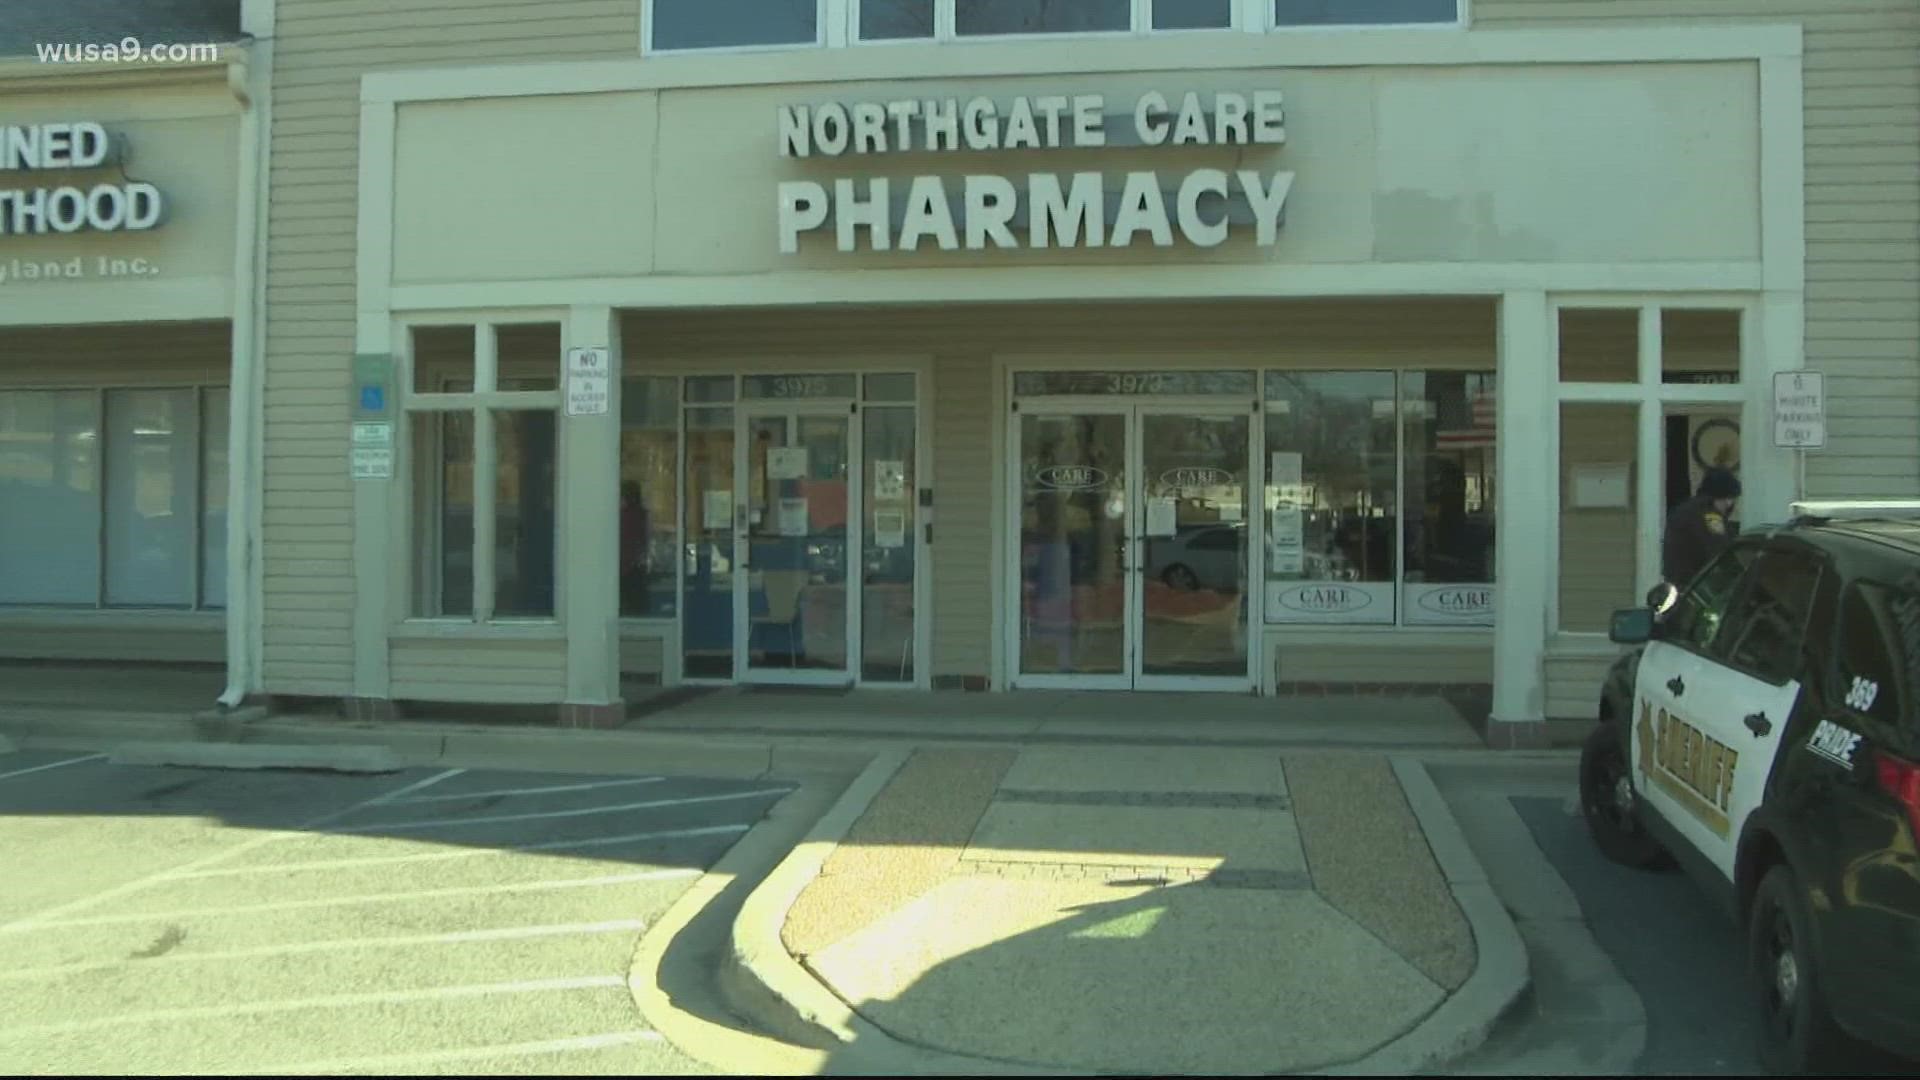 An independently owned pharmacy in Waldorf, MD was raided by the DEA. Federal/state licenses were seized from Northgate Pharmacy Owner Vincent Ippolito.